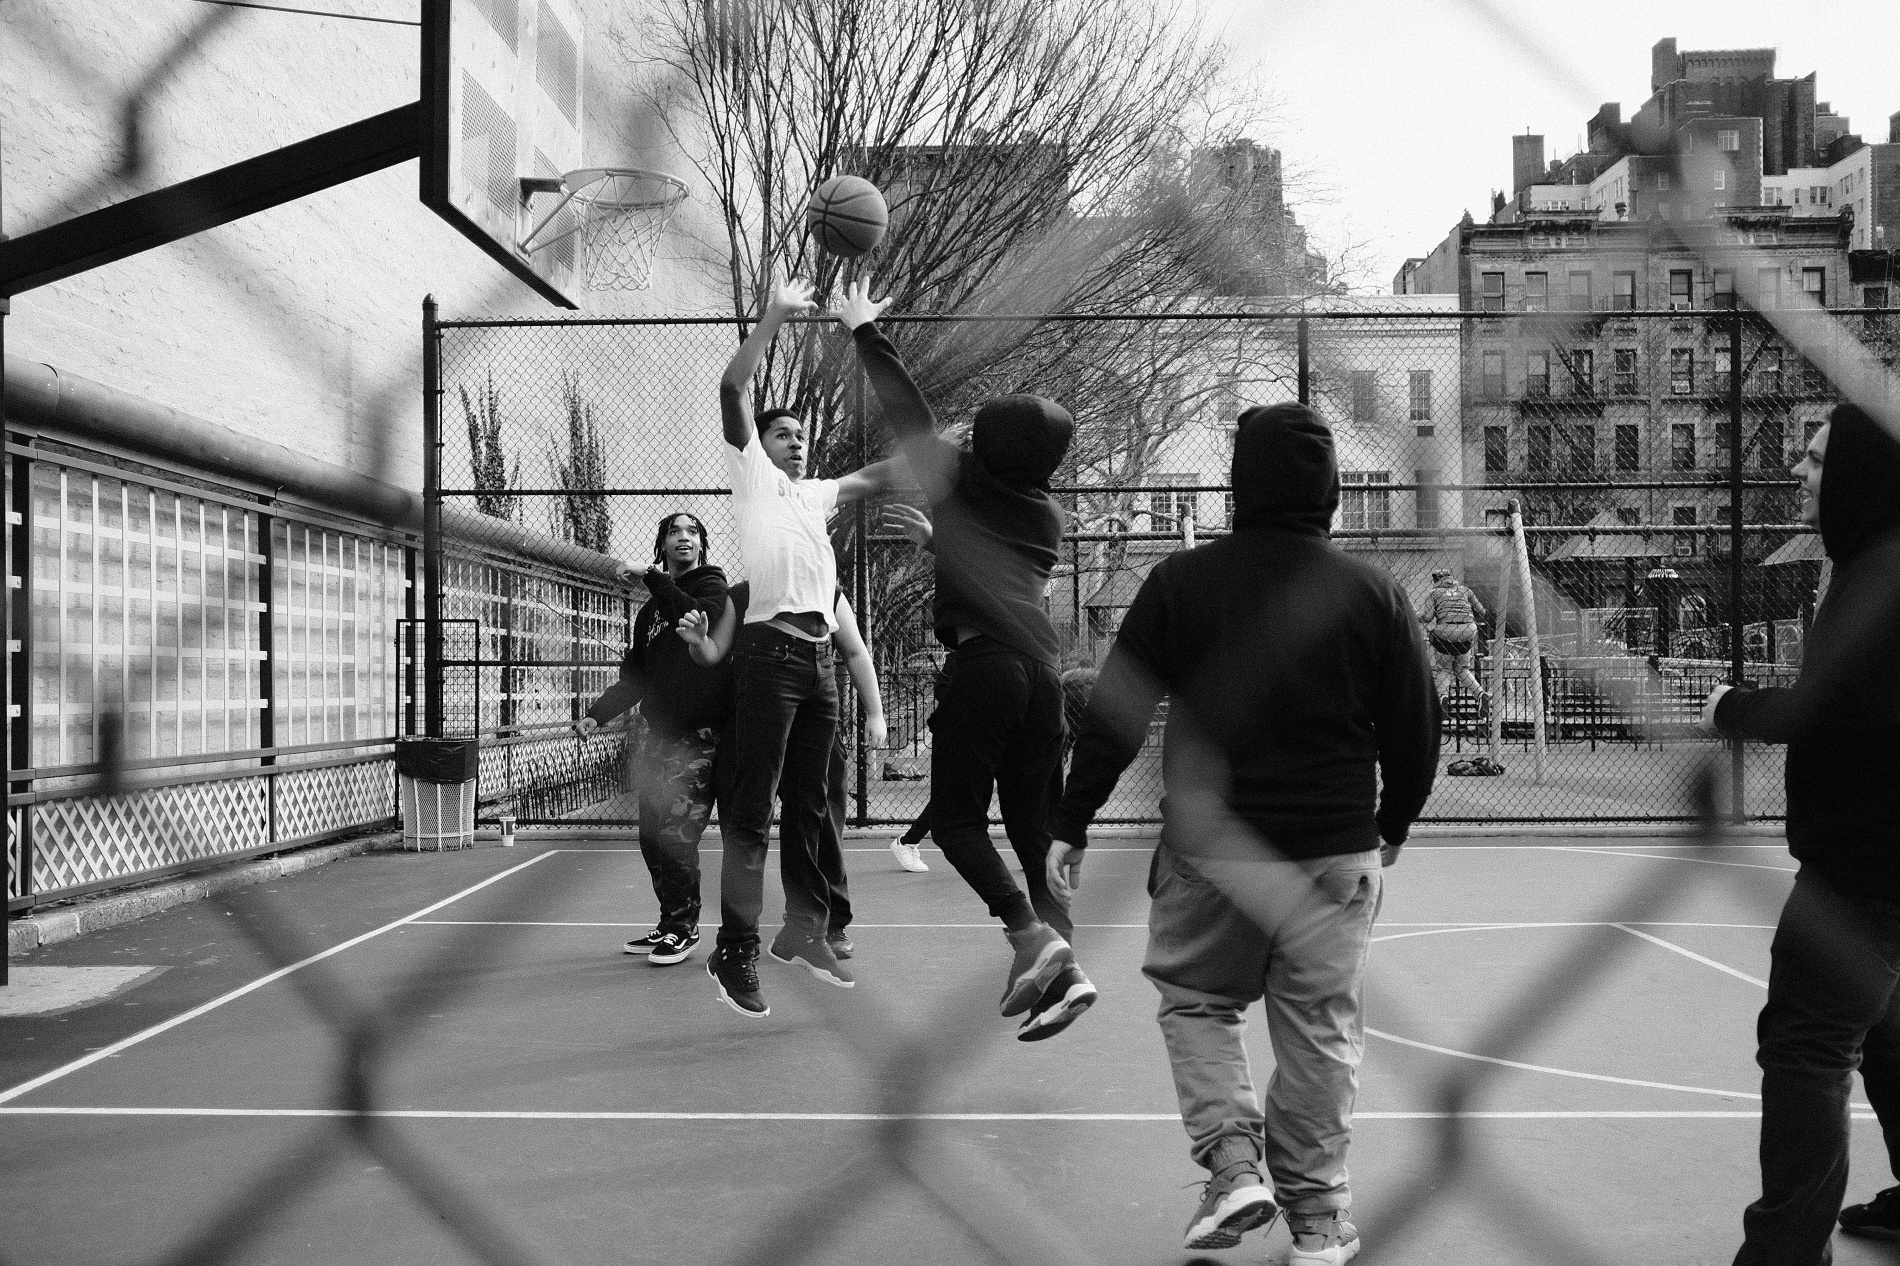 Playing basketball in New York